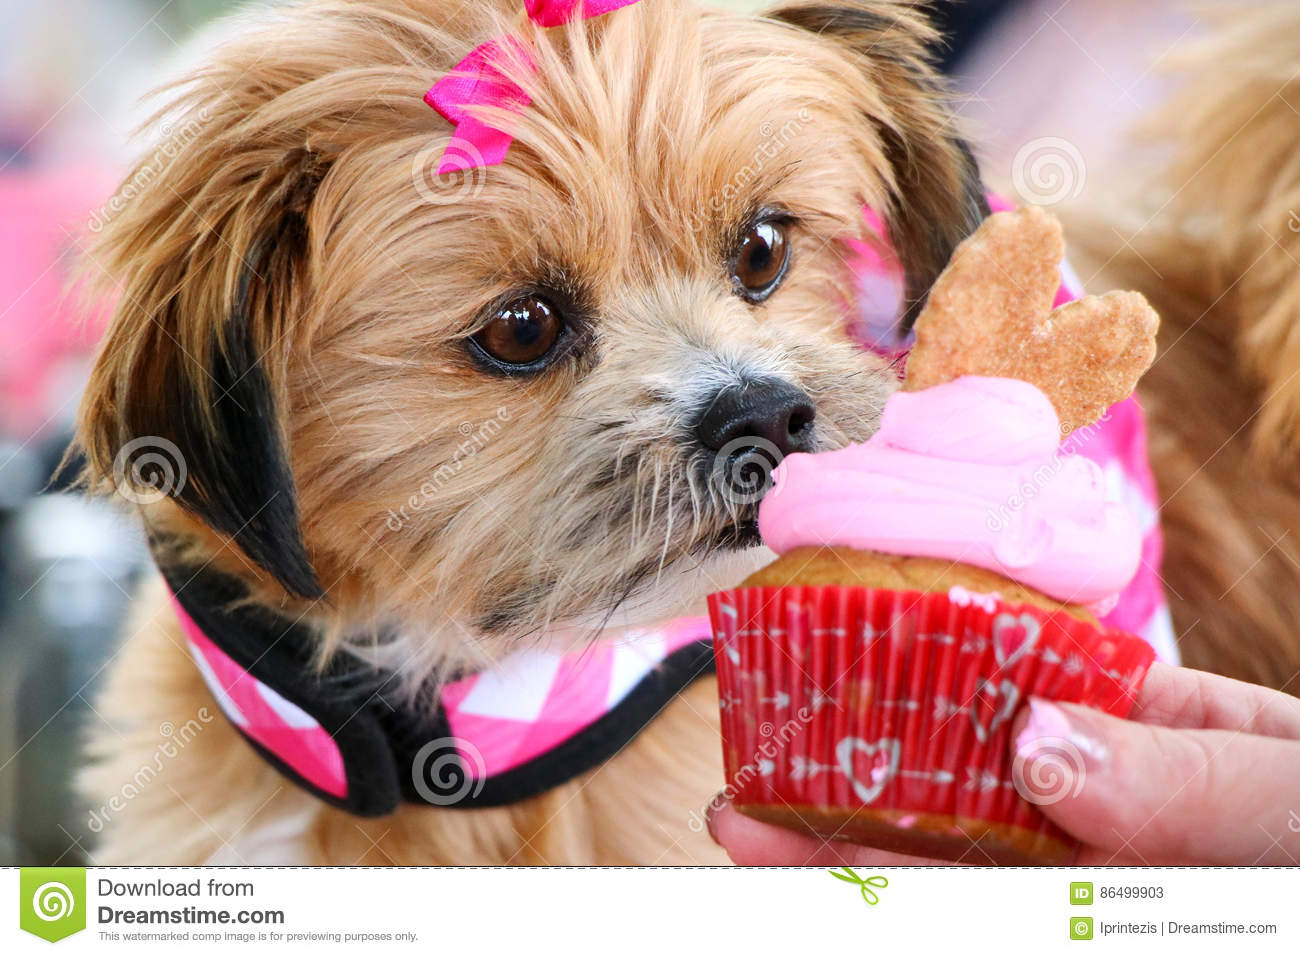 Cute Dogs Eating Cupcakes